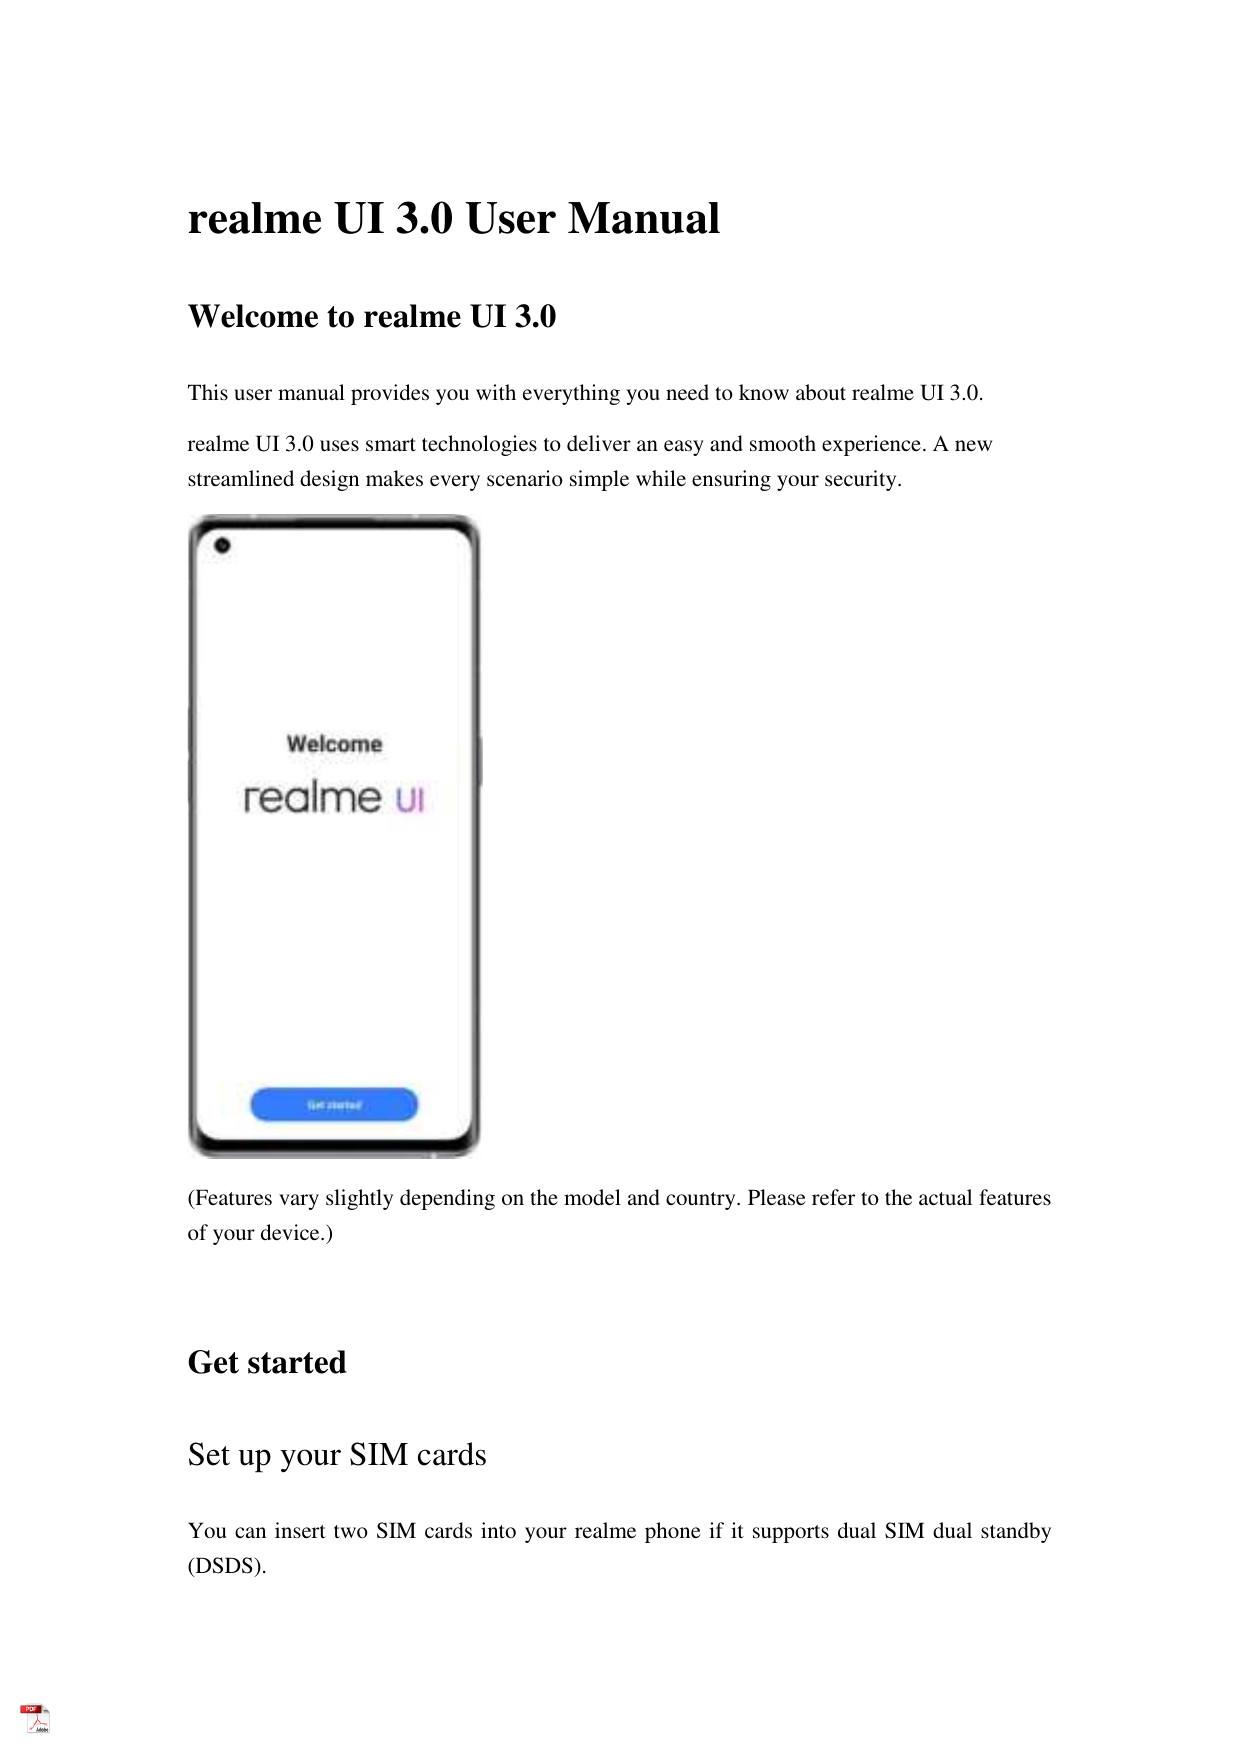 realme UI 3.0 User ManualWelcome to realme UI 3.0This user manual provides you with everything you need to know about realme UI 